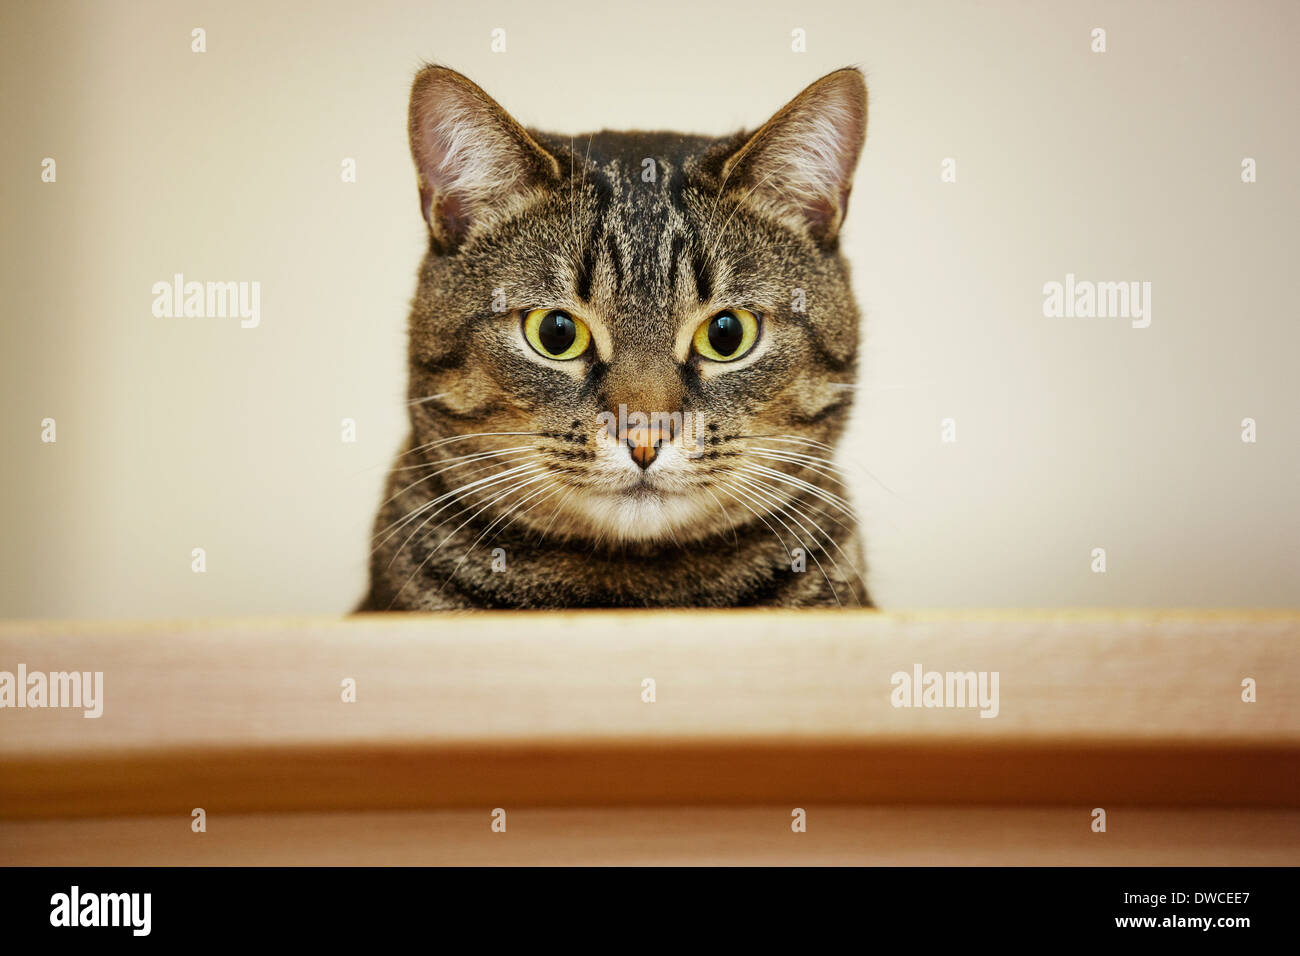 Close up portrait of domestic cat with Mackerel tabby pattern Stock Photo